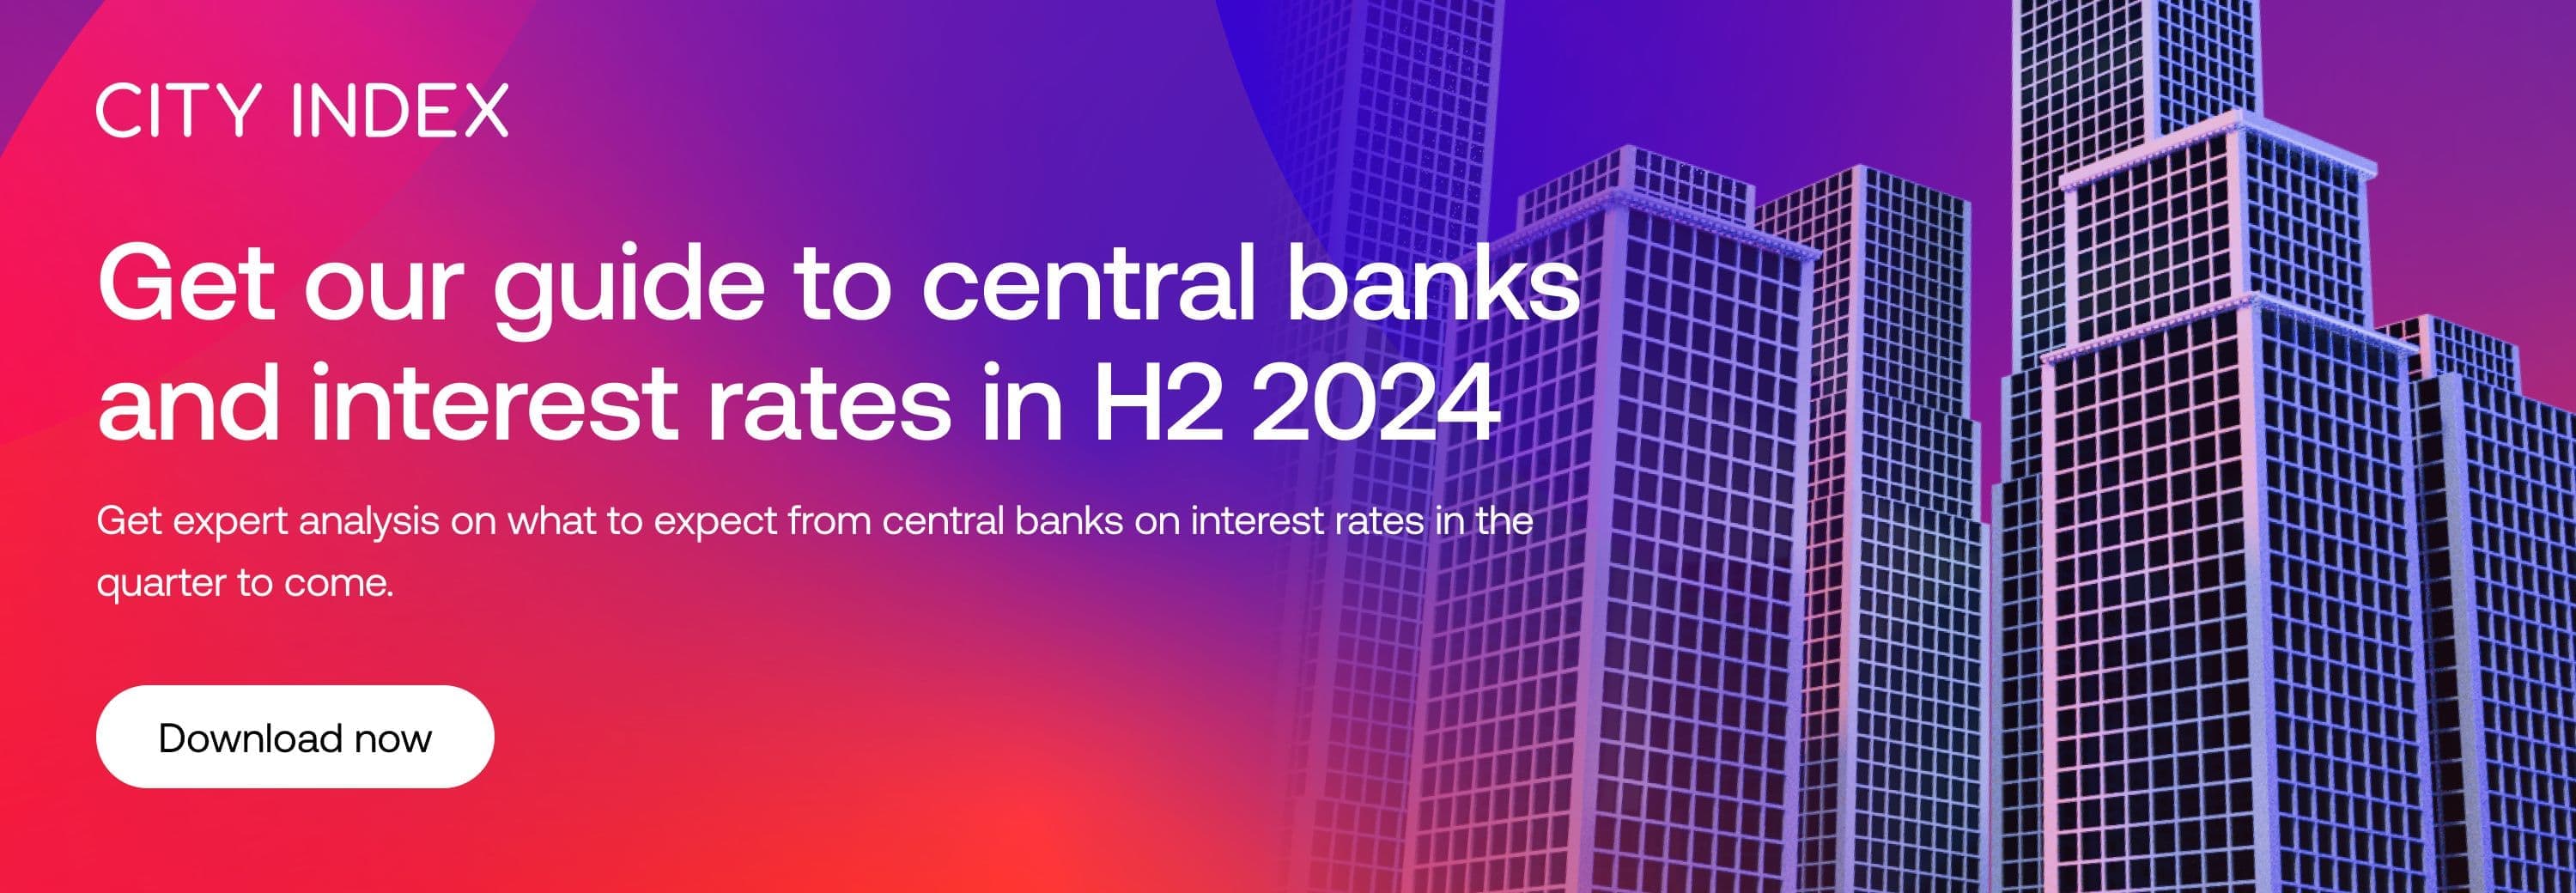 Get our guide to central banks and interest rates in H2 2024